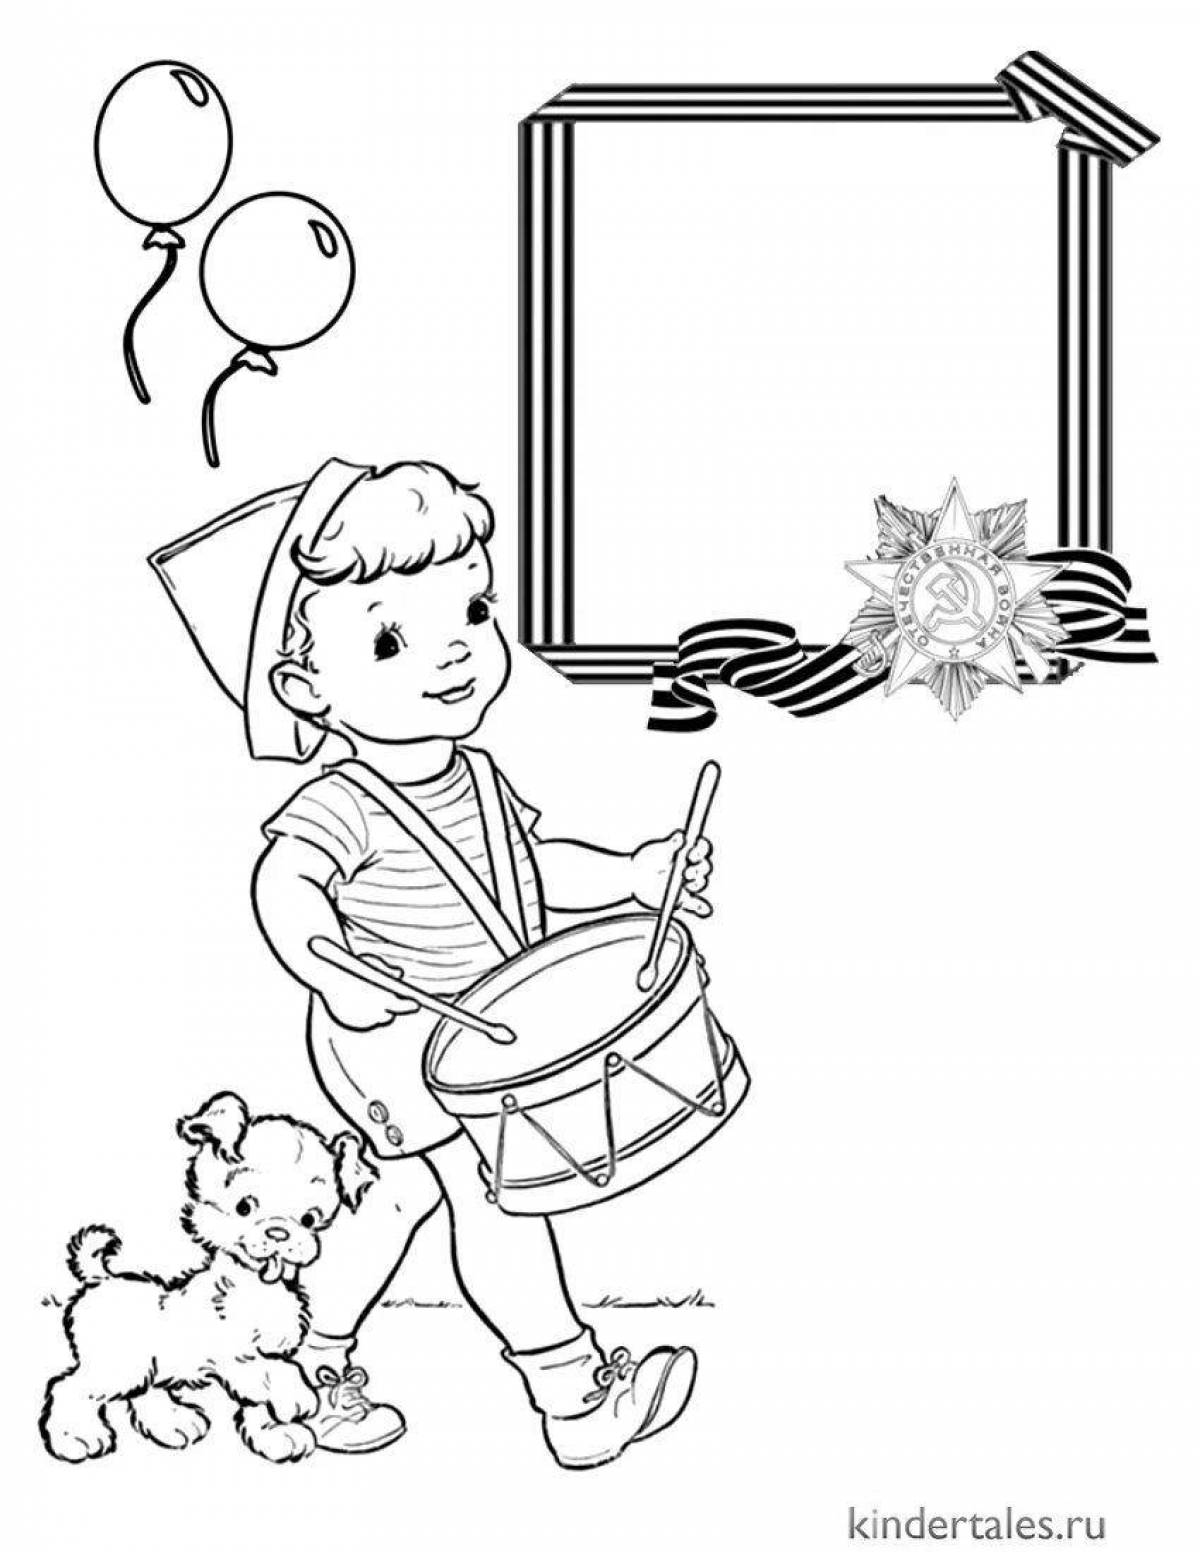 Adorable victory day coloring for kids